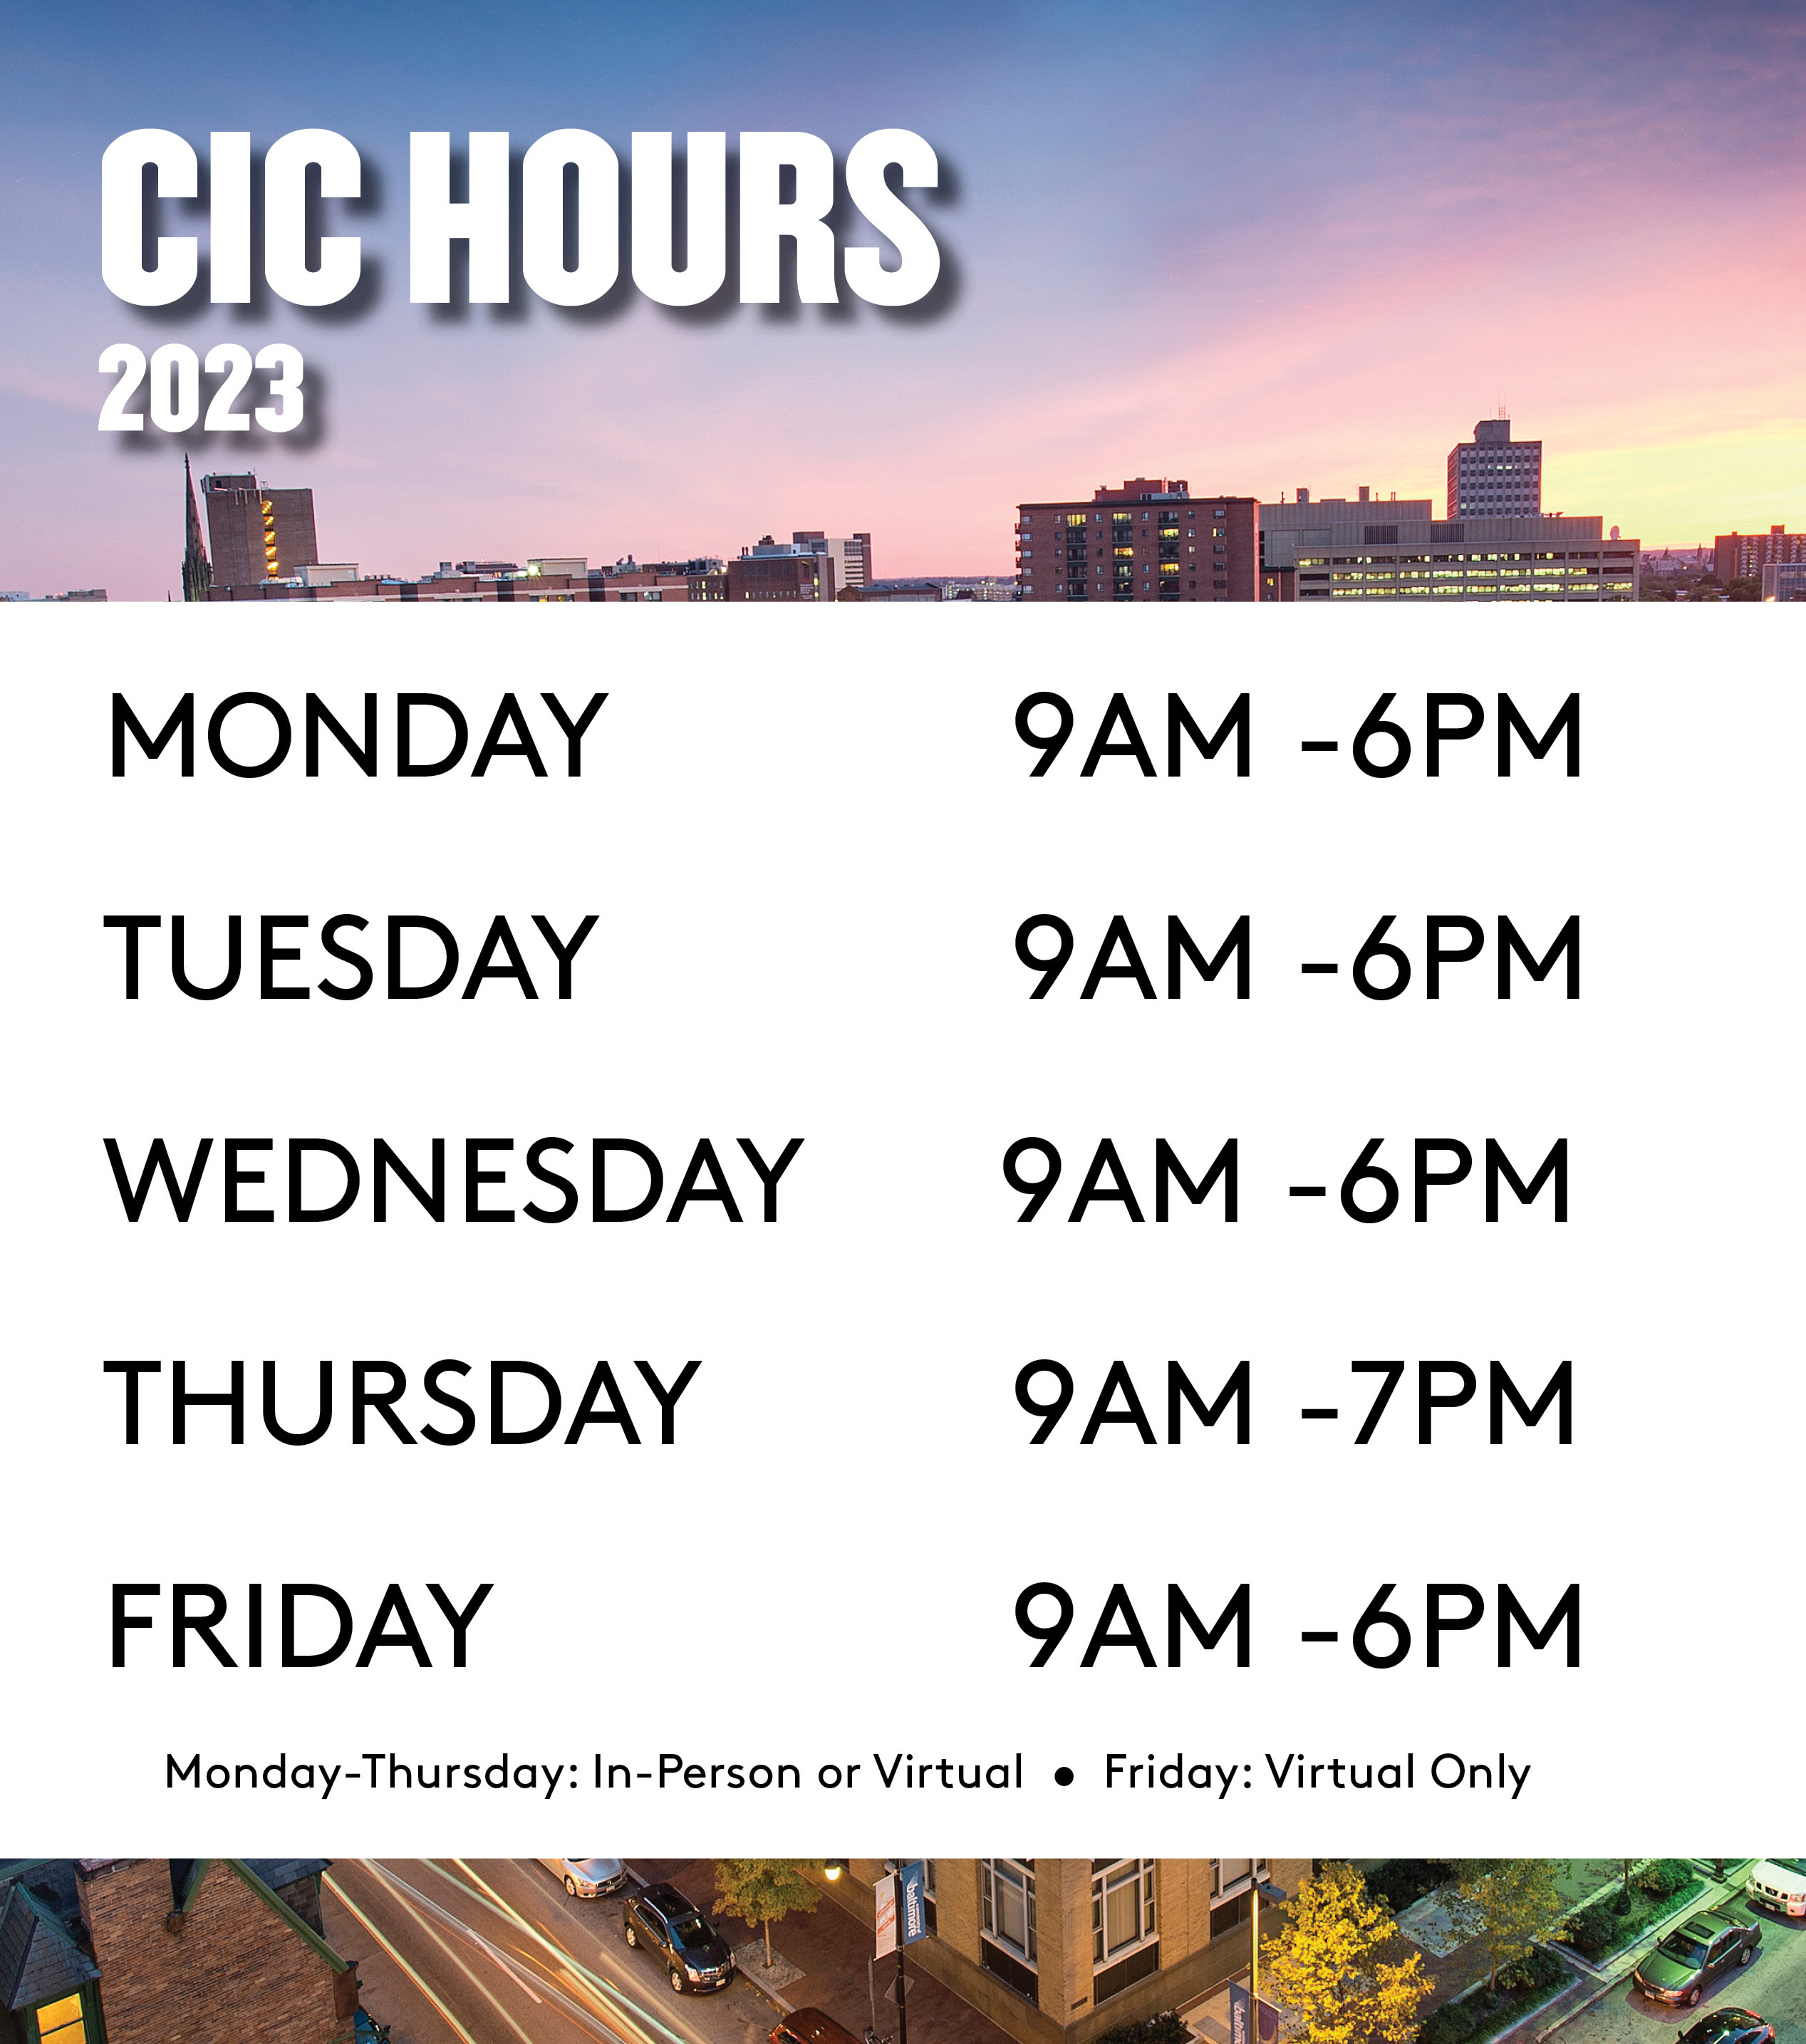 CIC 2023 Hours  9AM-6PM on all days but Thursday, where the CIC is open until 7PM. All days offer virtual and in-person options except Friday, which is all virtual.